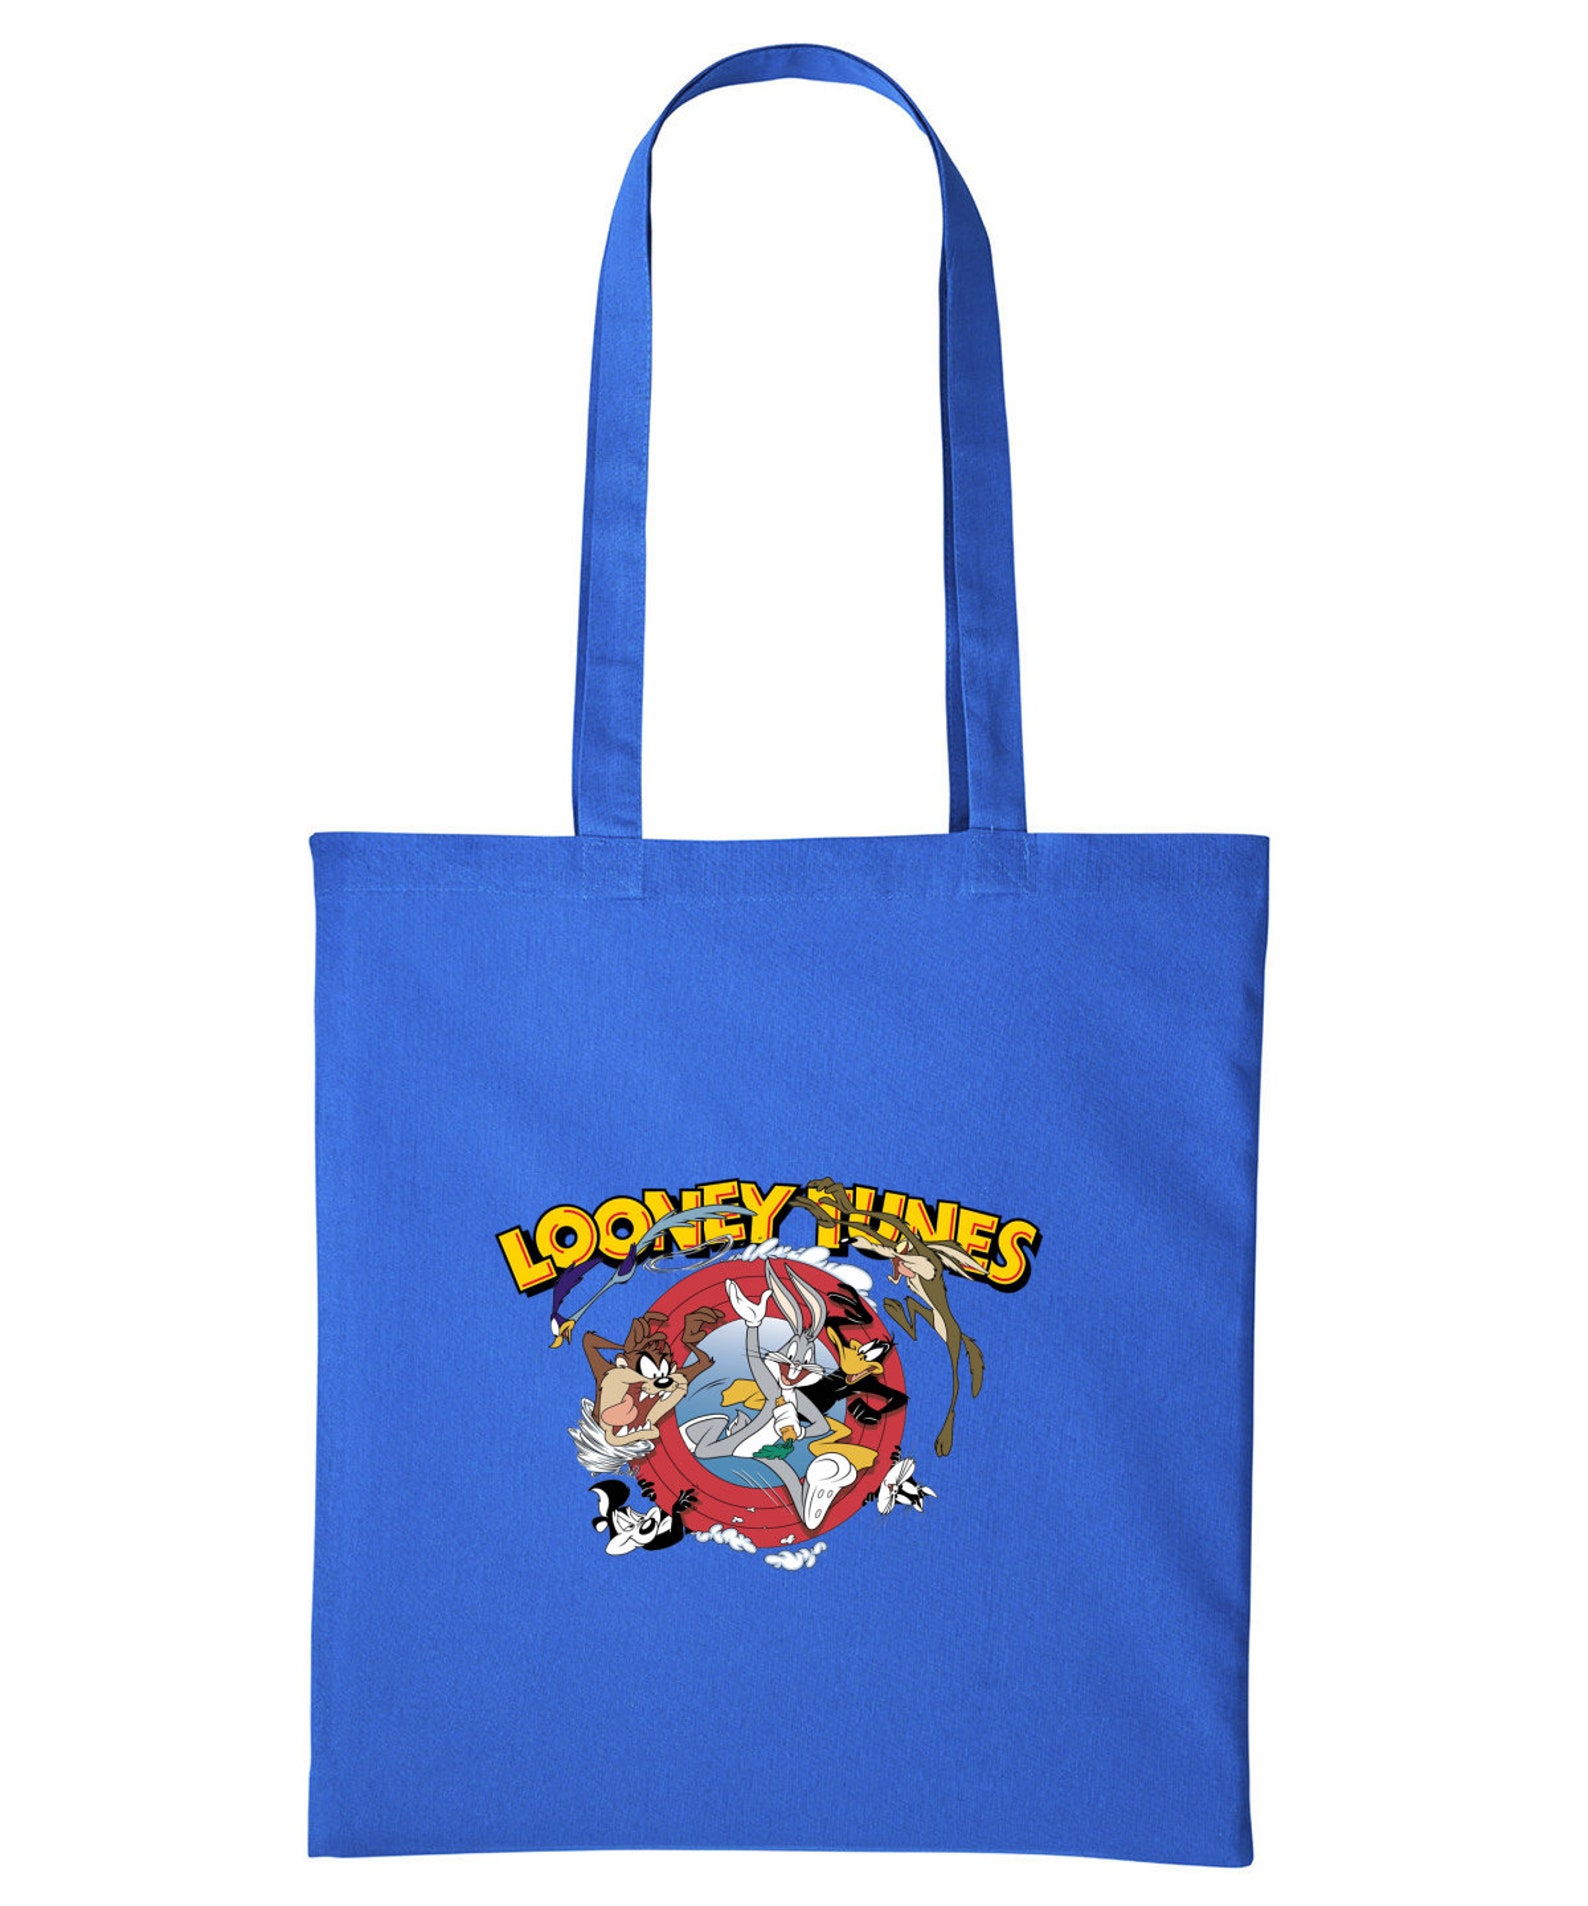 Looney Tunes Cartoon Characters Funny Tote Shopper Bags | Etsy